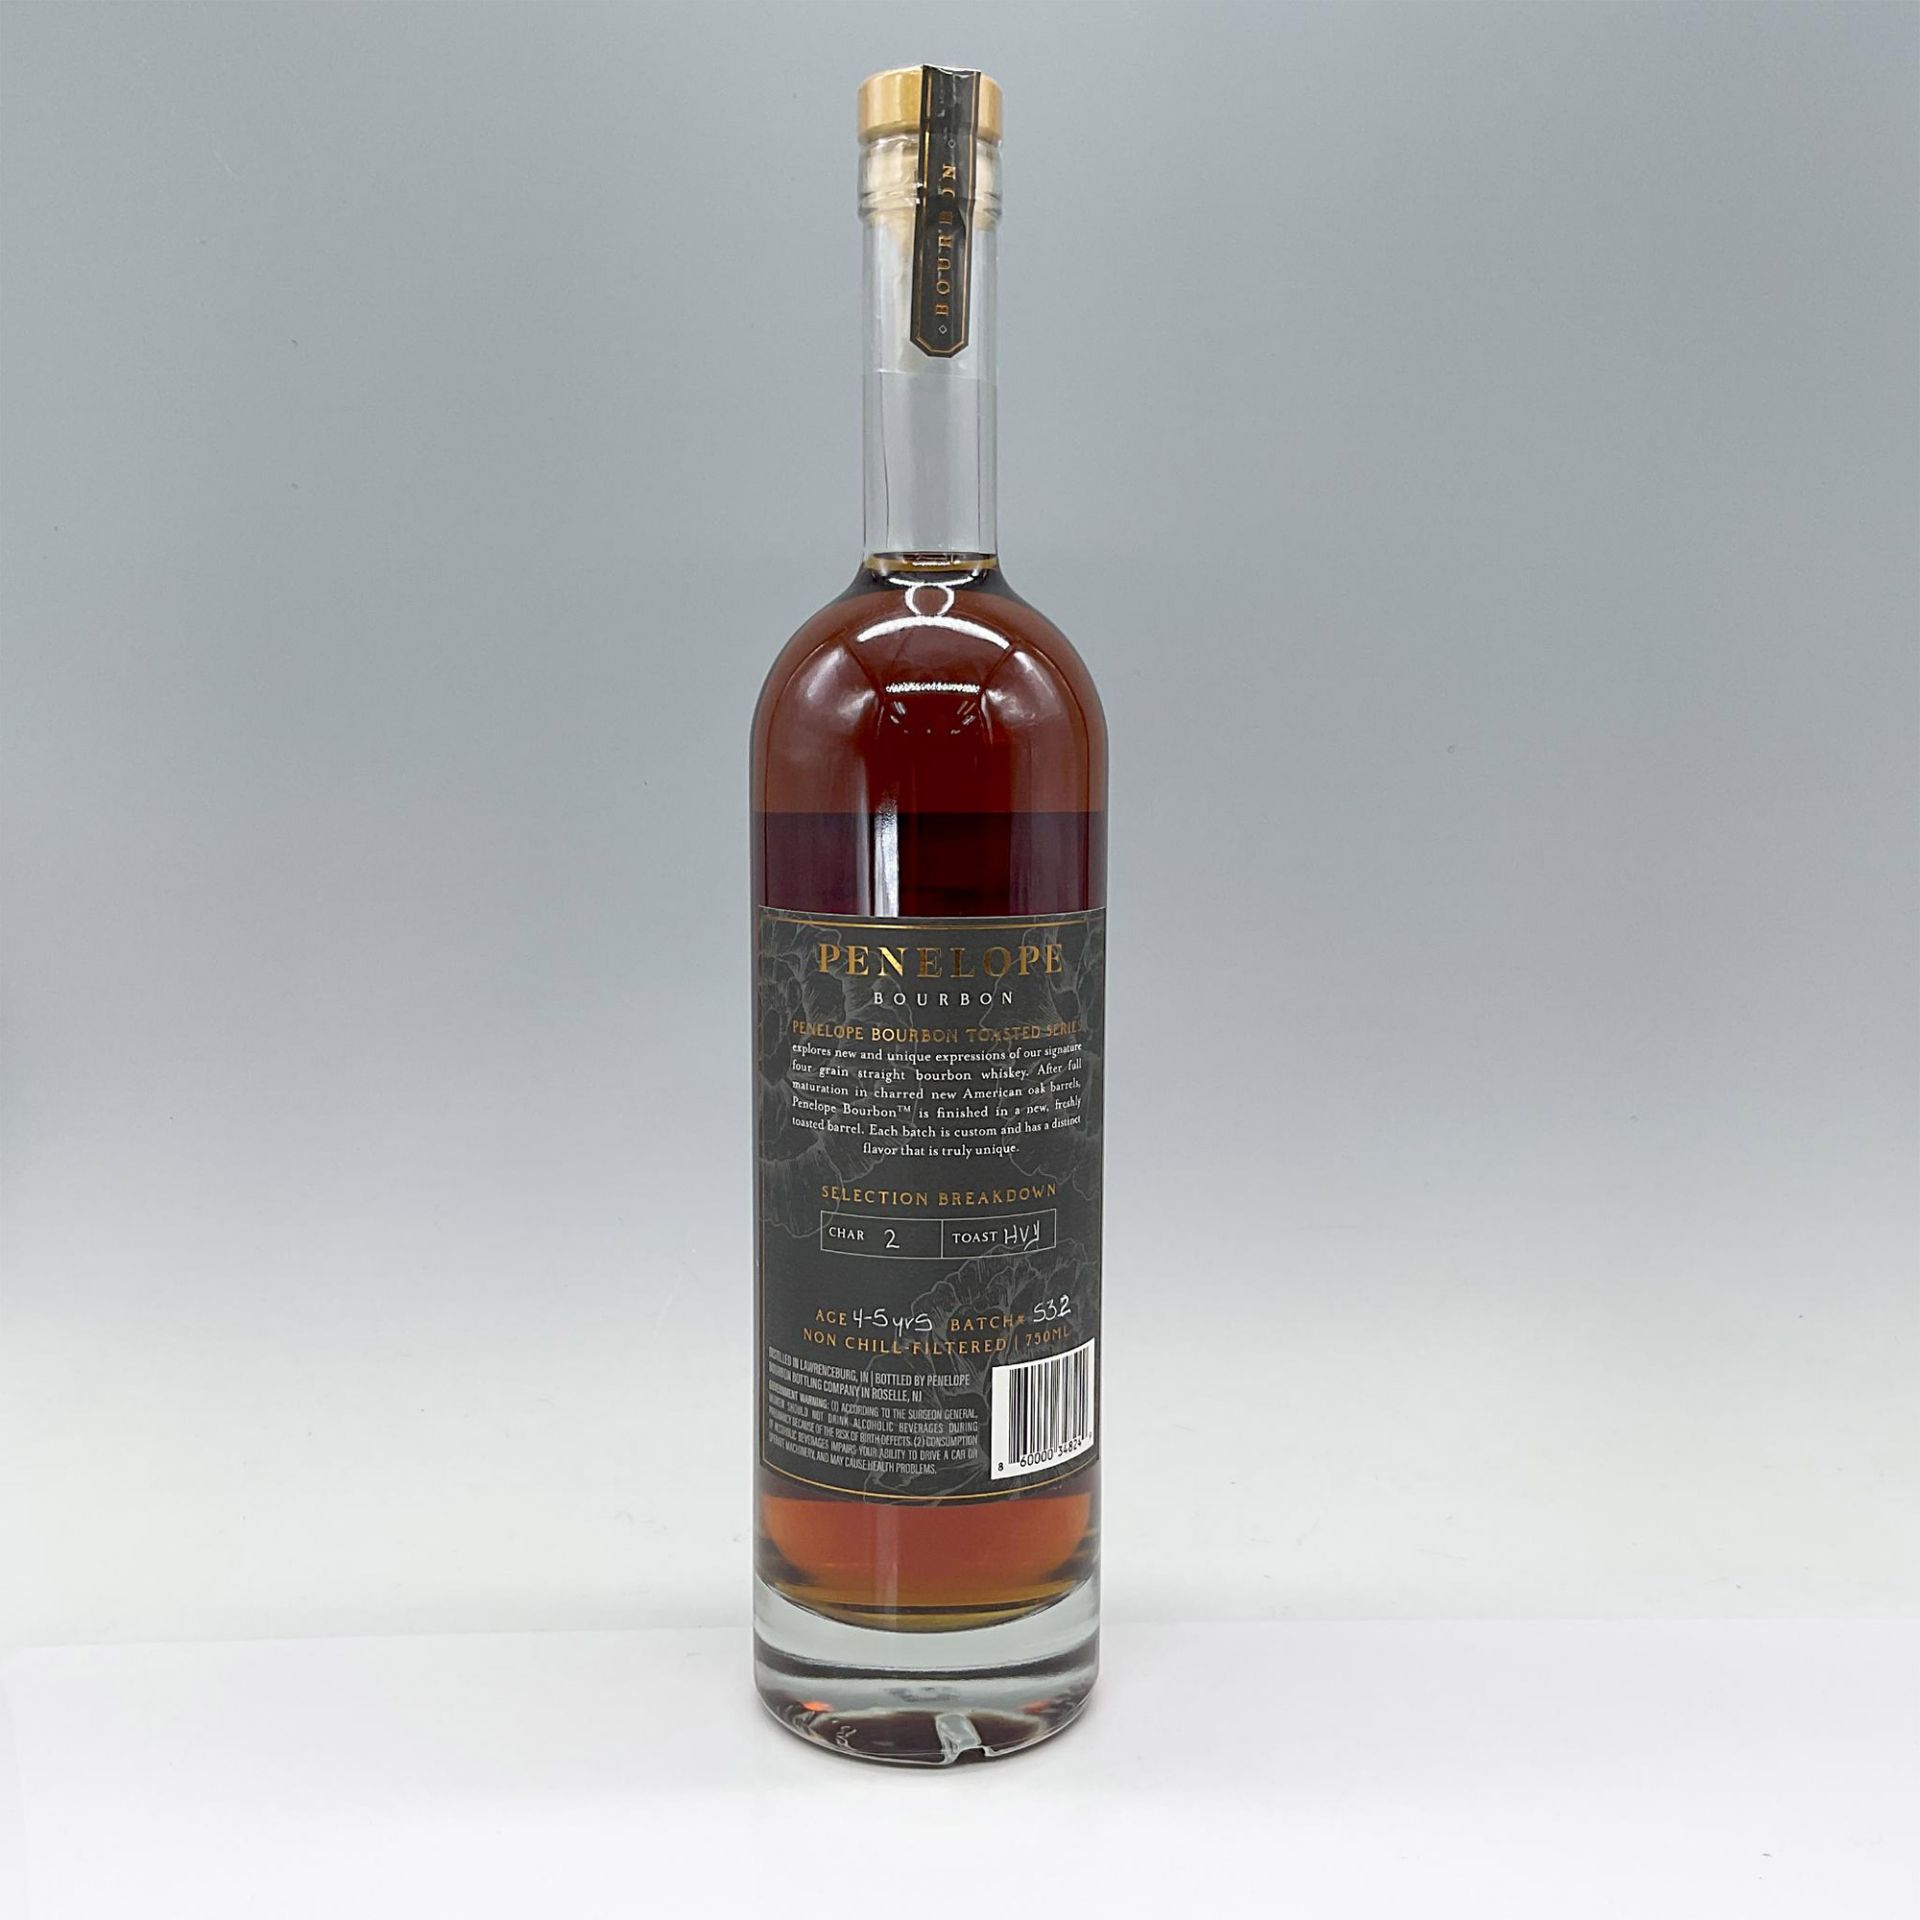 Penelope Bourbon Barrel Strength Toasted Series 115 Proof - Image 2 of 3